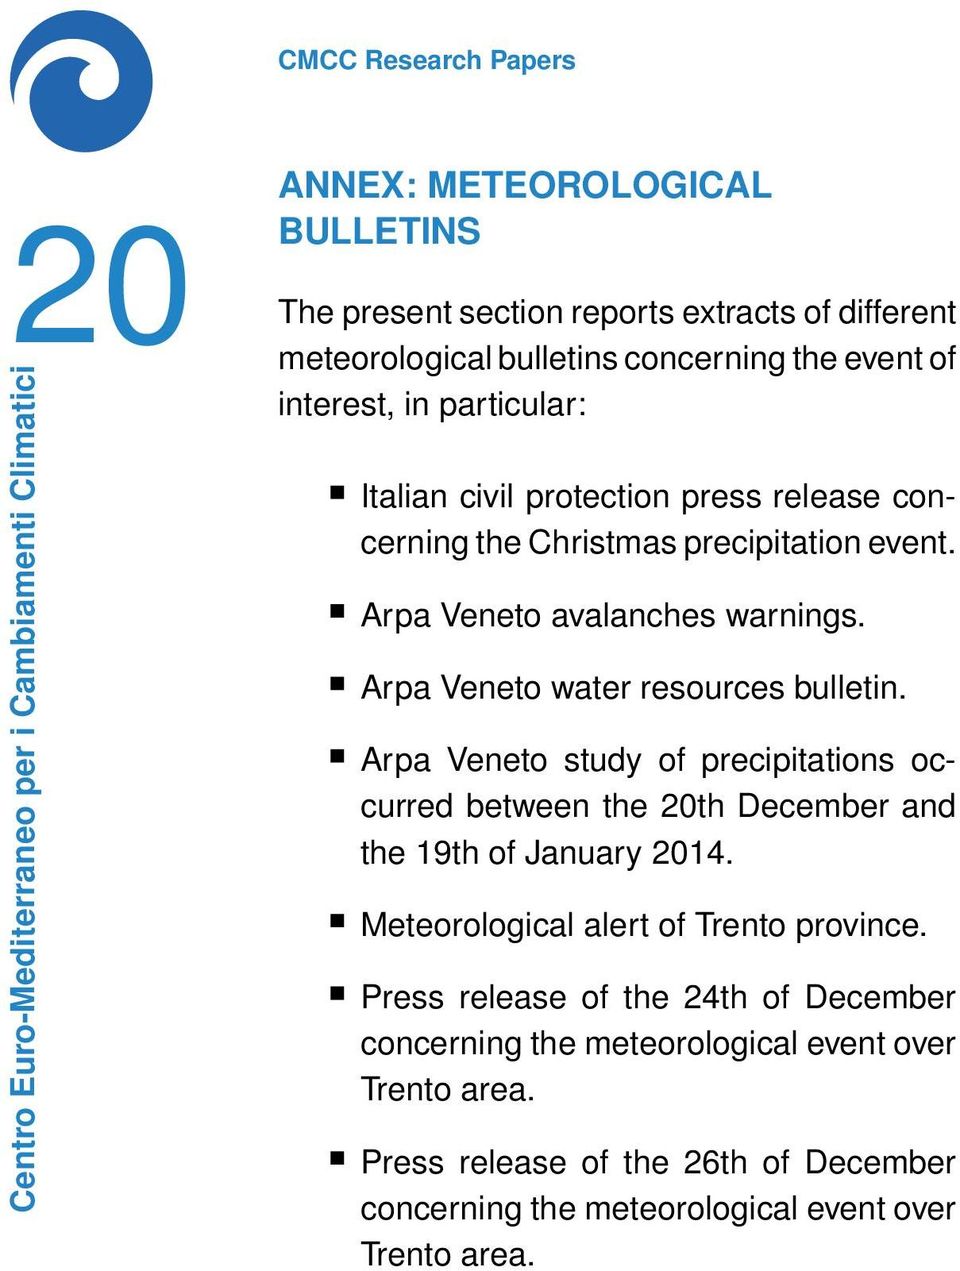 Arpa Veneto water resources bulletin. Arpa Veneto study of precipitations occurred between the 20th December and the 19th of January 2014.